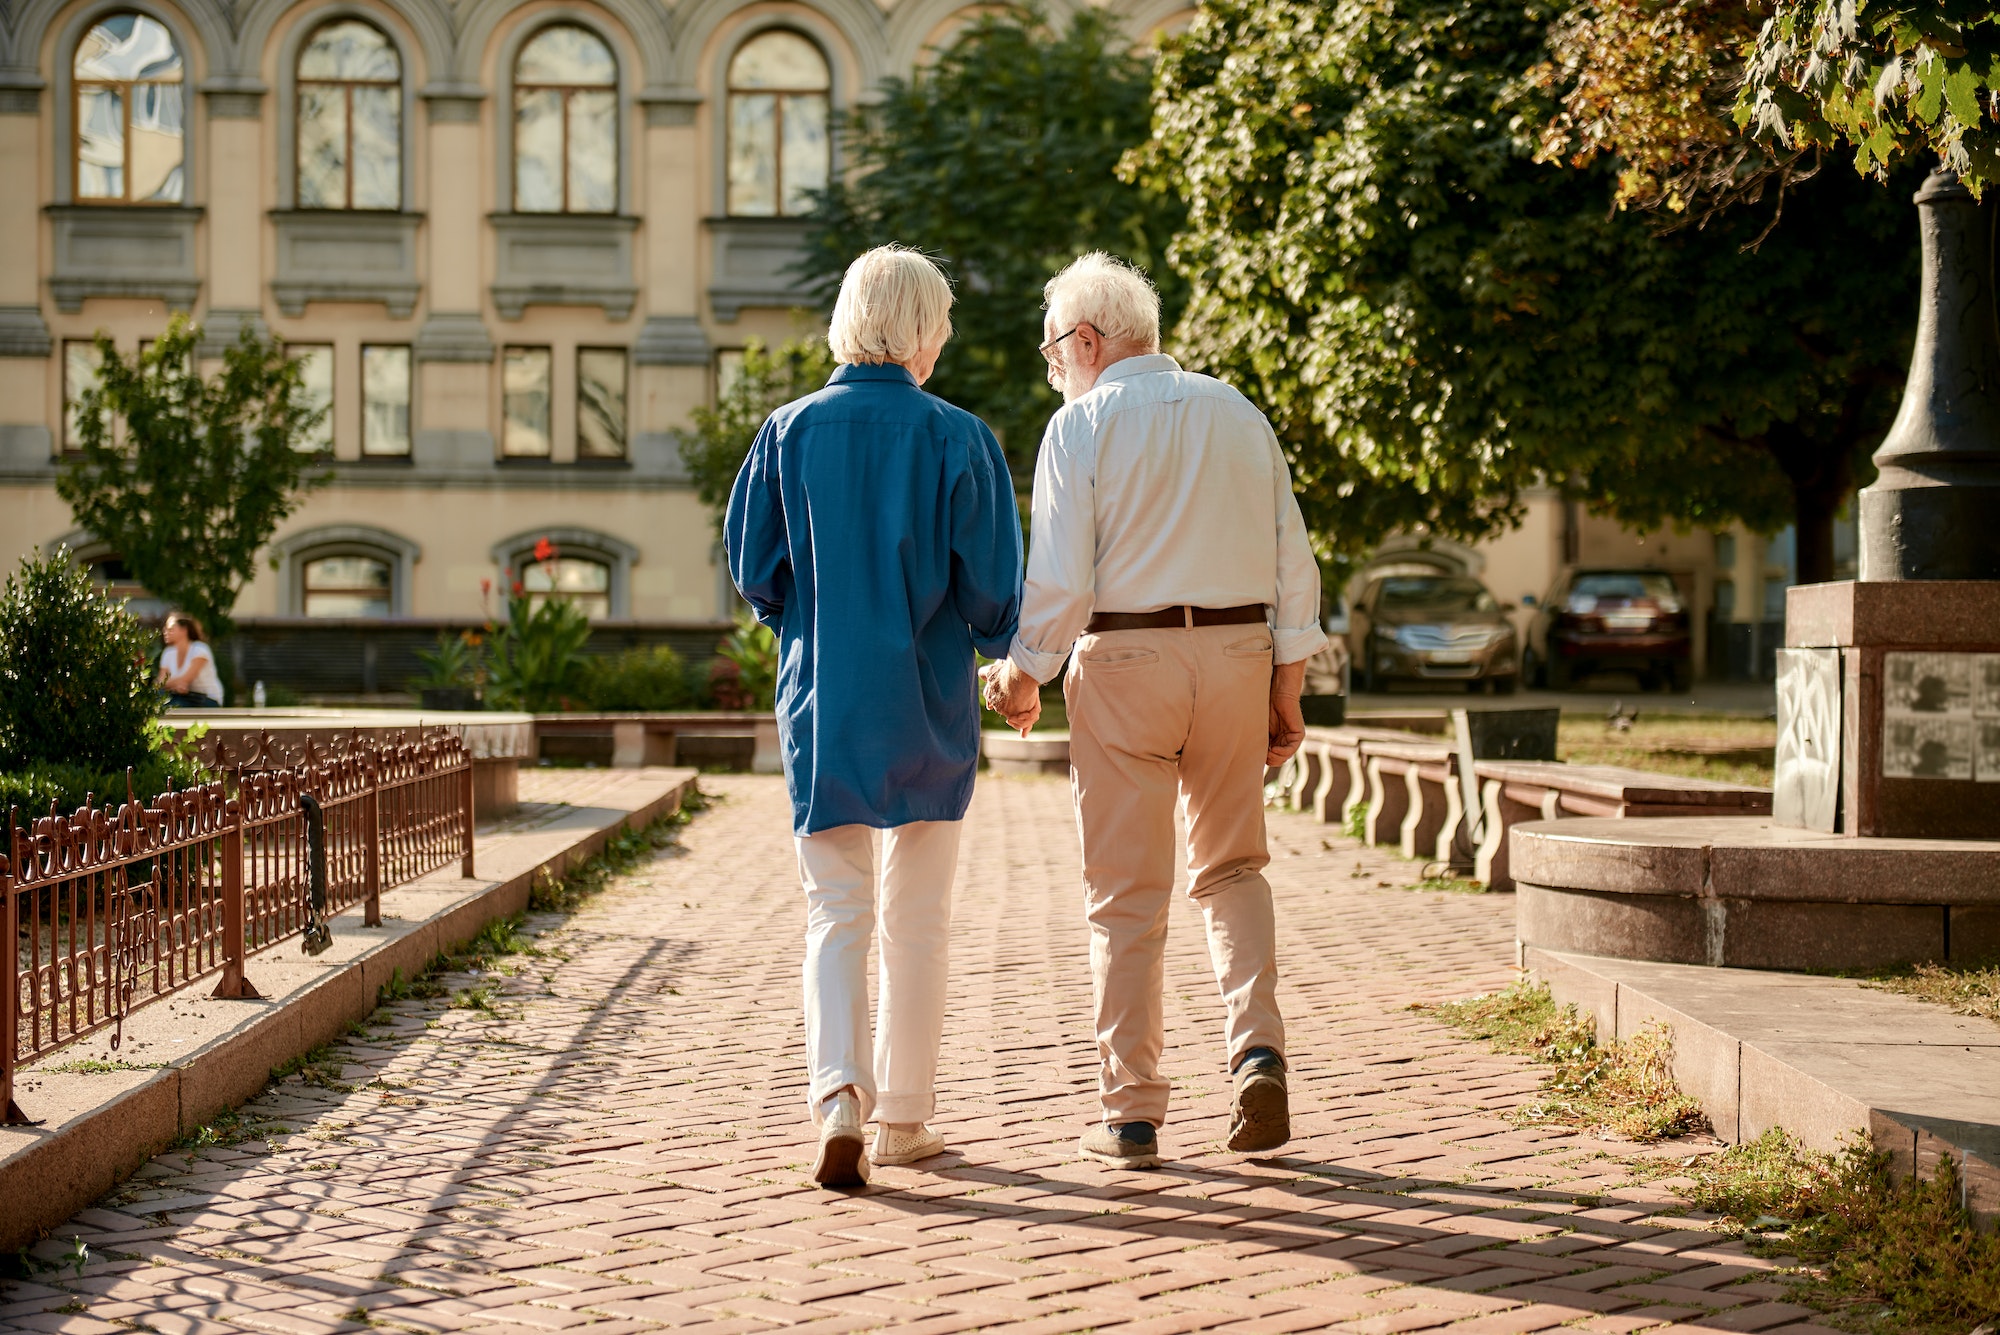 Back view of elderly couple holding hands while walking together outdoors